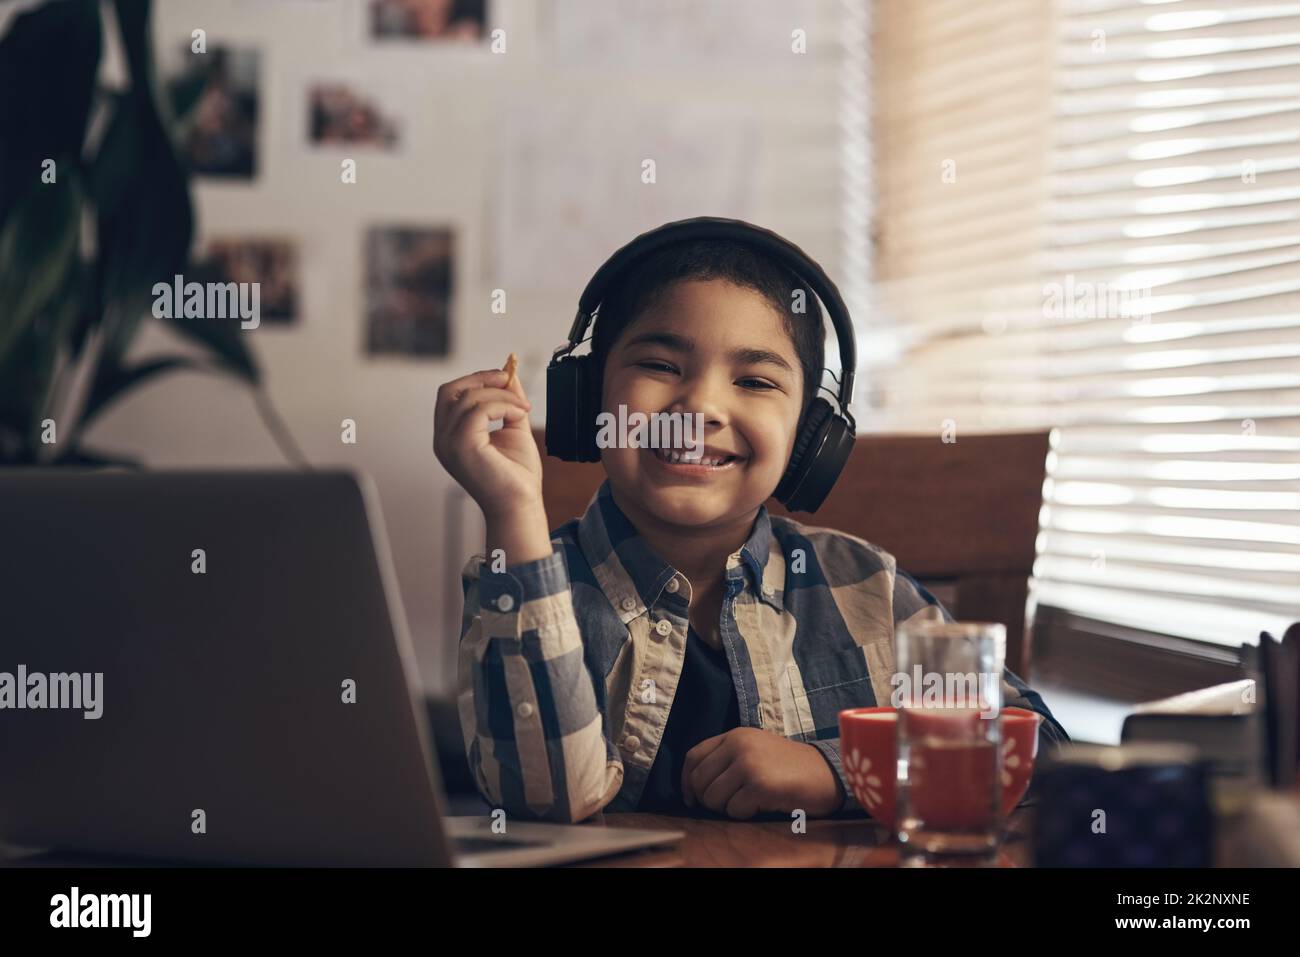 Break time is snack time. Shot of an adorable little boy using a laptop and headphones while completing a school assignment at home. Stock Photo